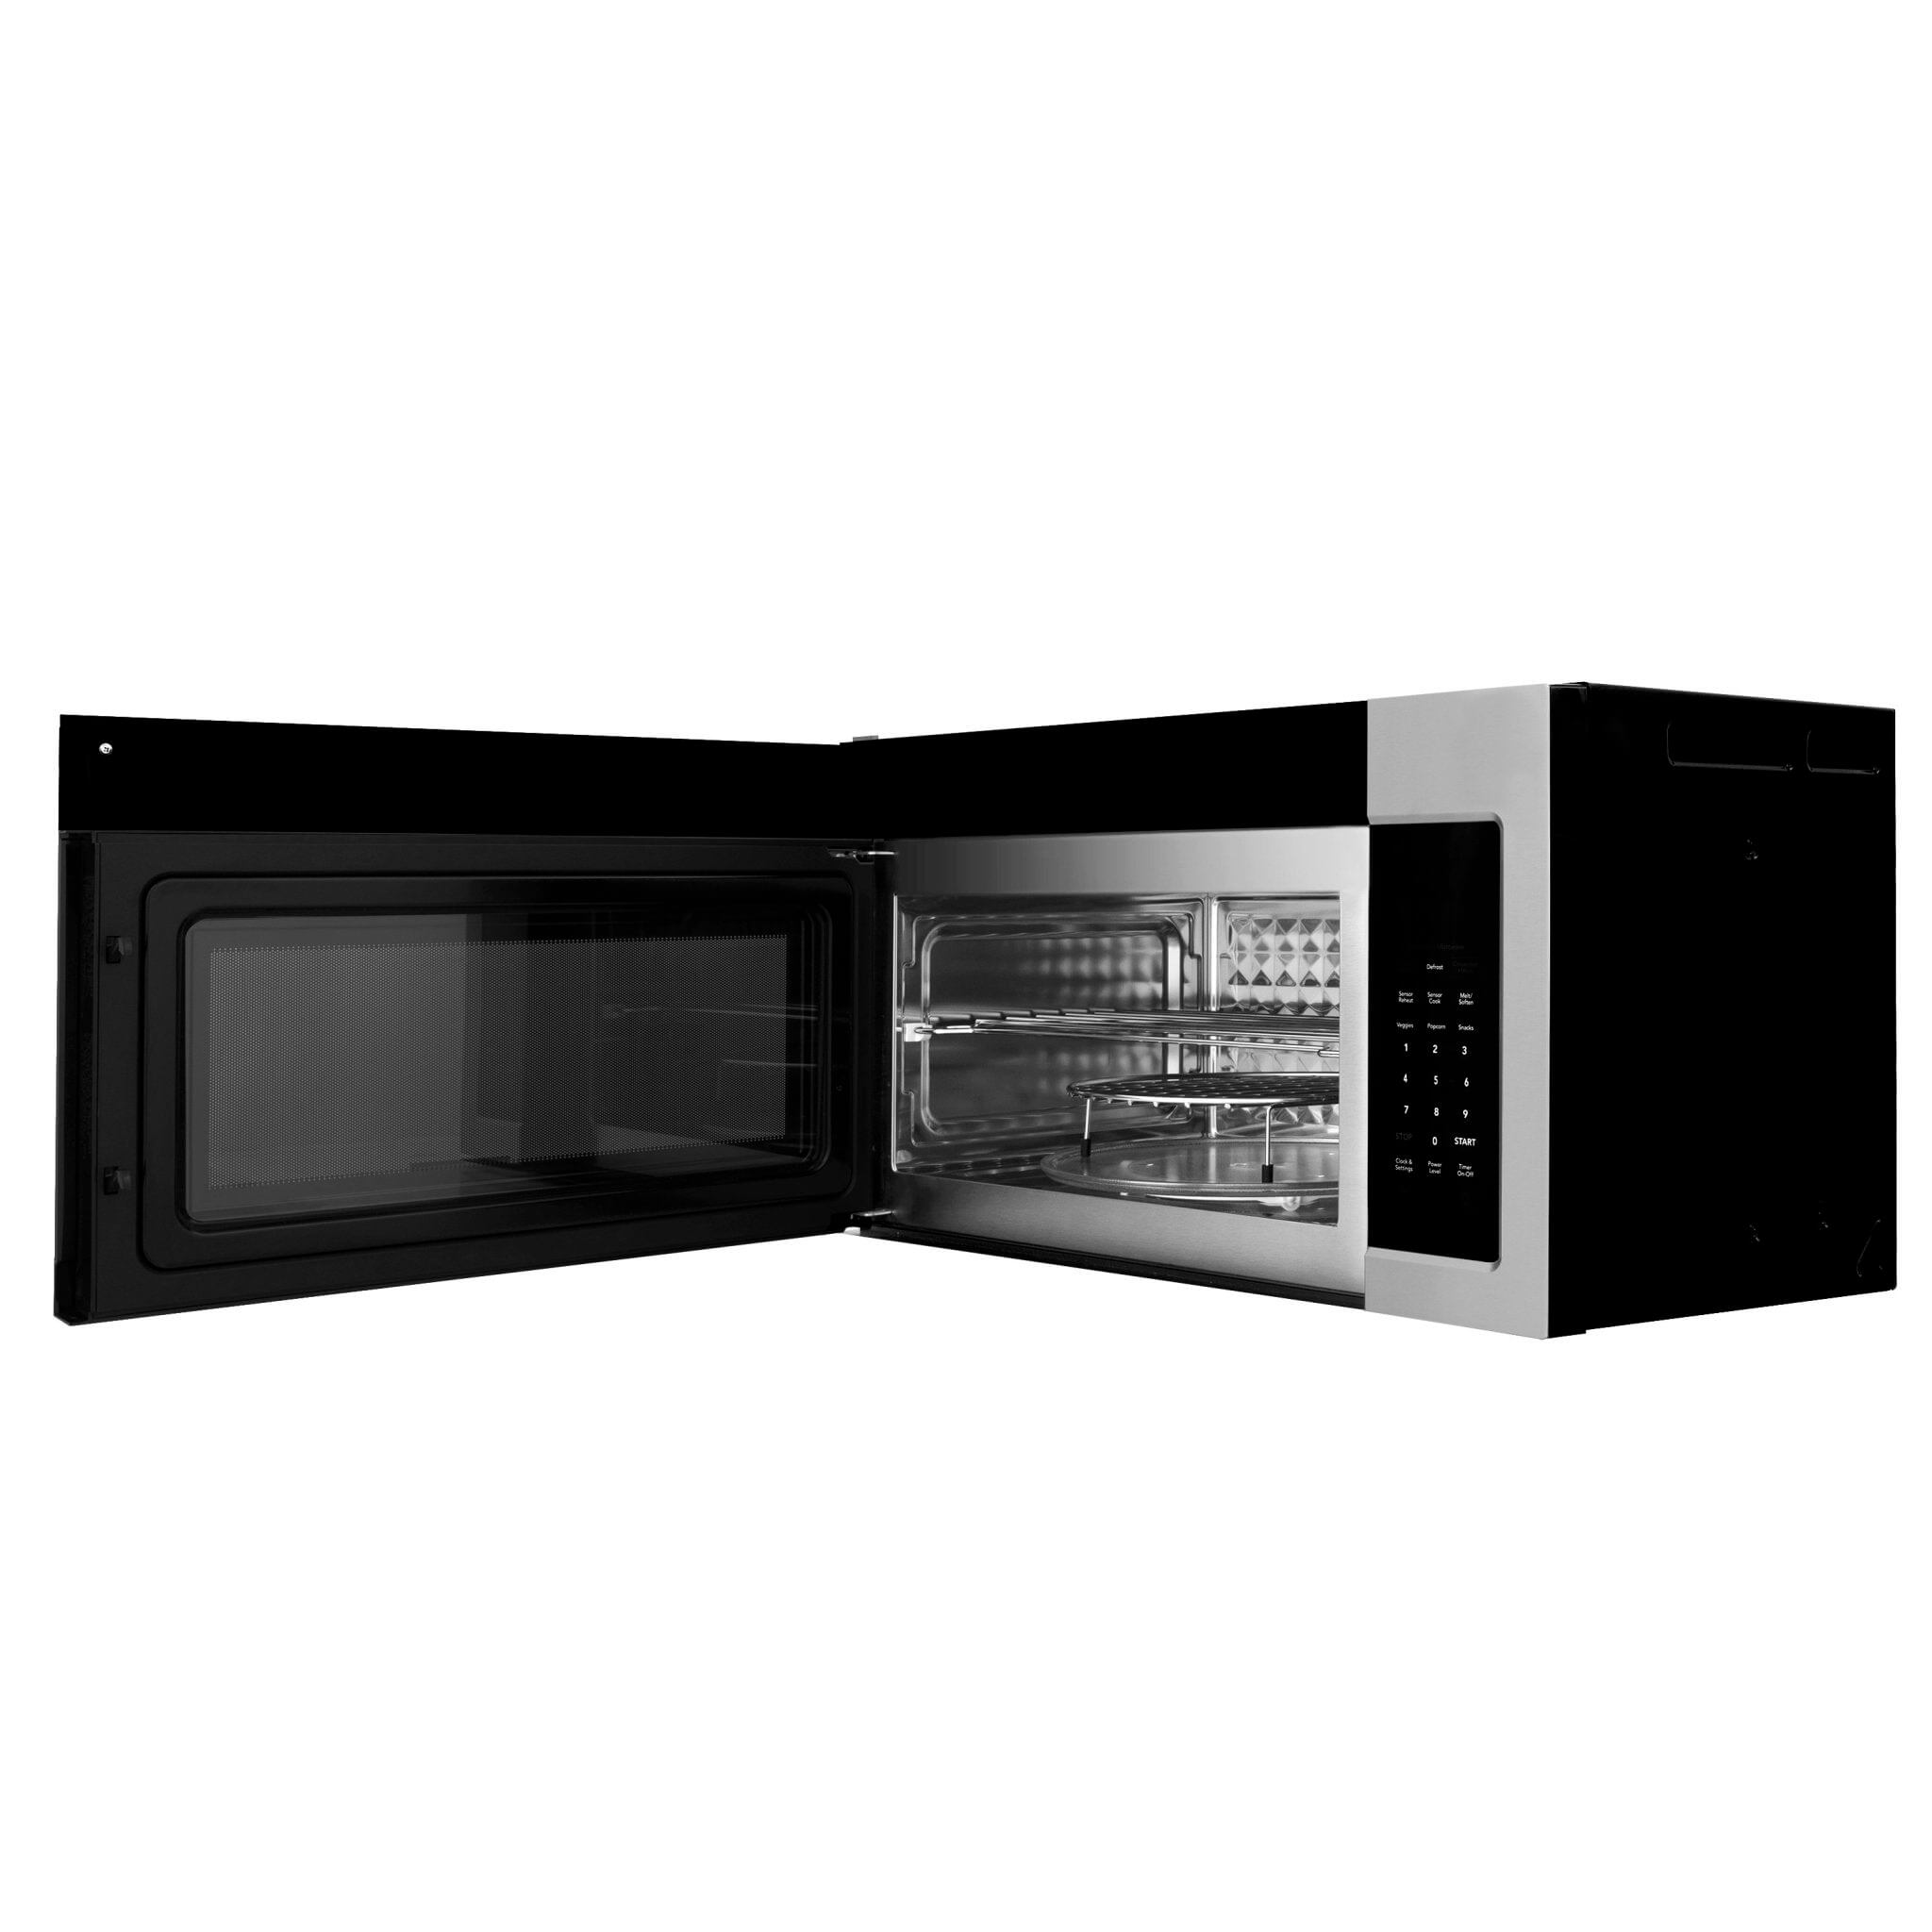 Best Buy: ZLINE Over the Range Convection Microwave Oven in Stainless Steel  with Traditional Handle and Sensor Cooking Silver MWO-OTR-H-30